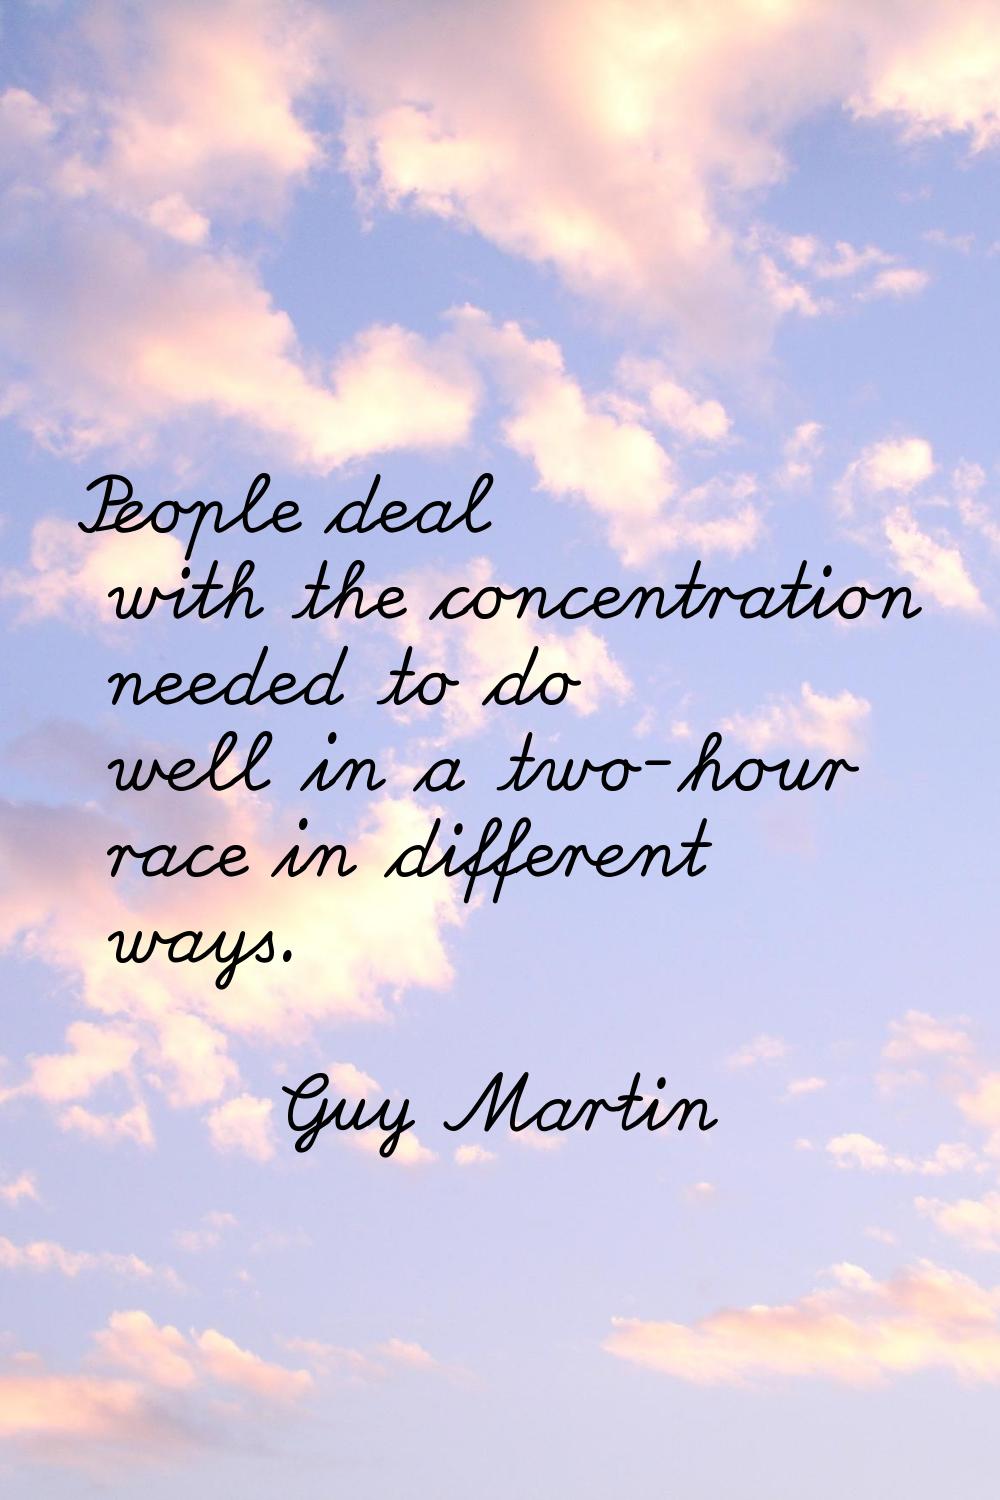 People deal with the concentration needed to do well in a two-hour race in different ways.